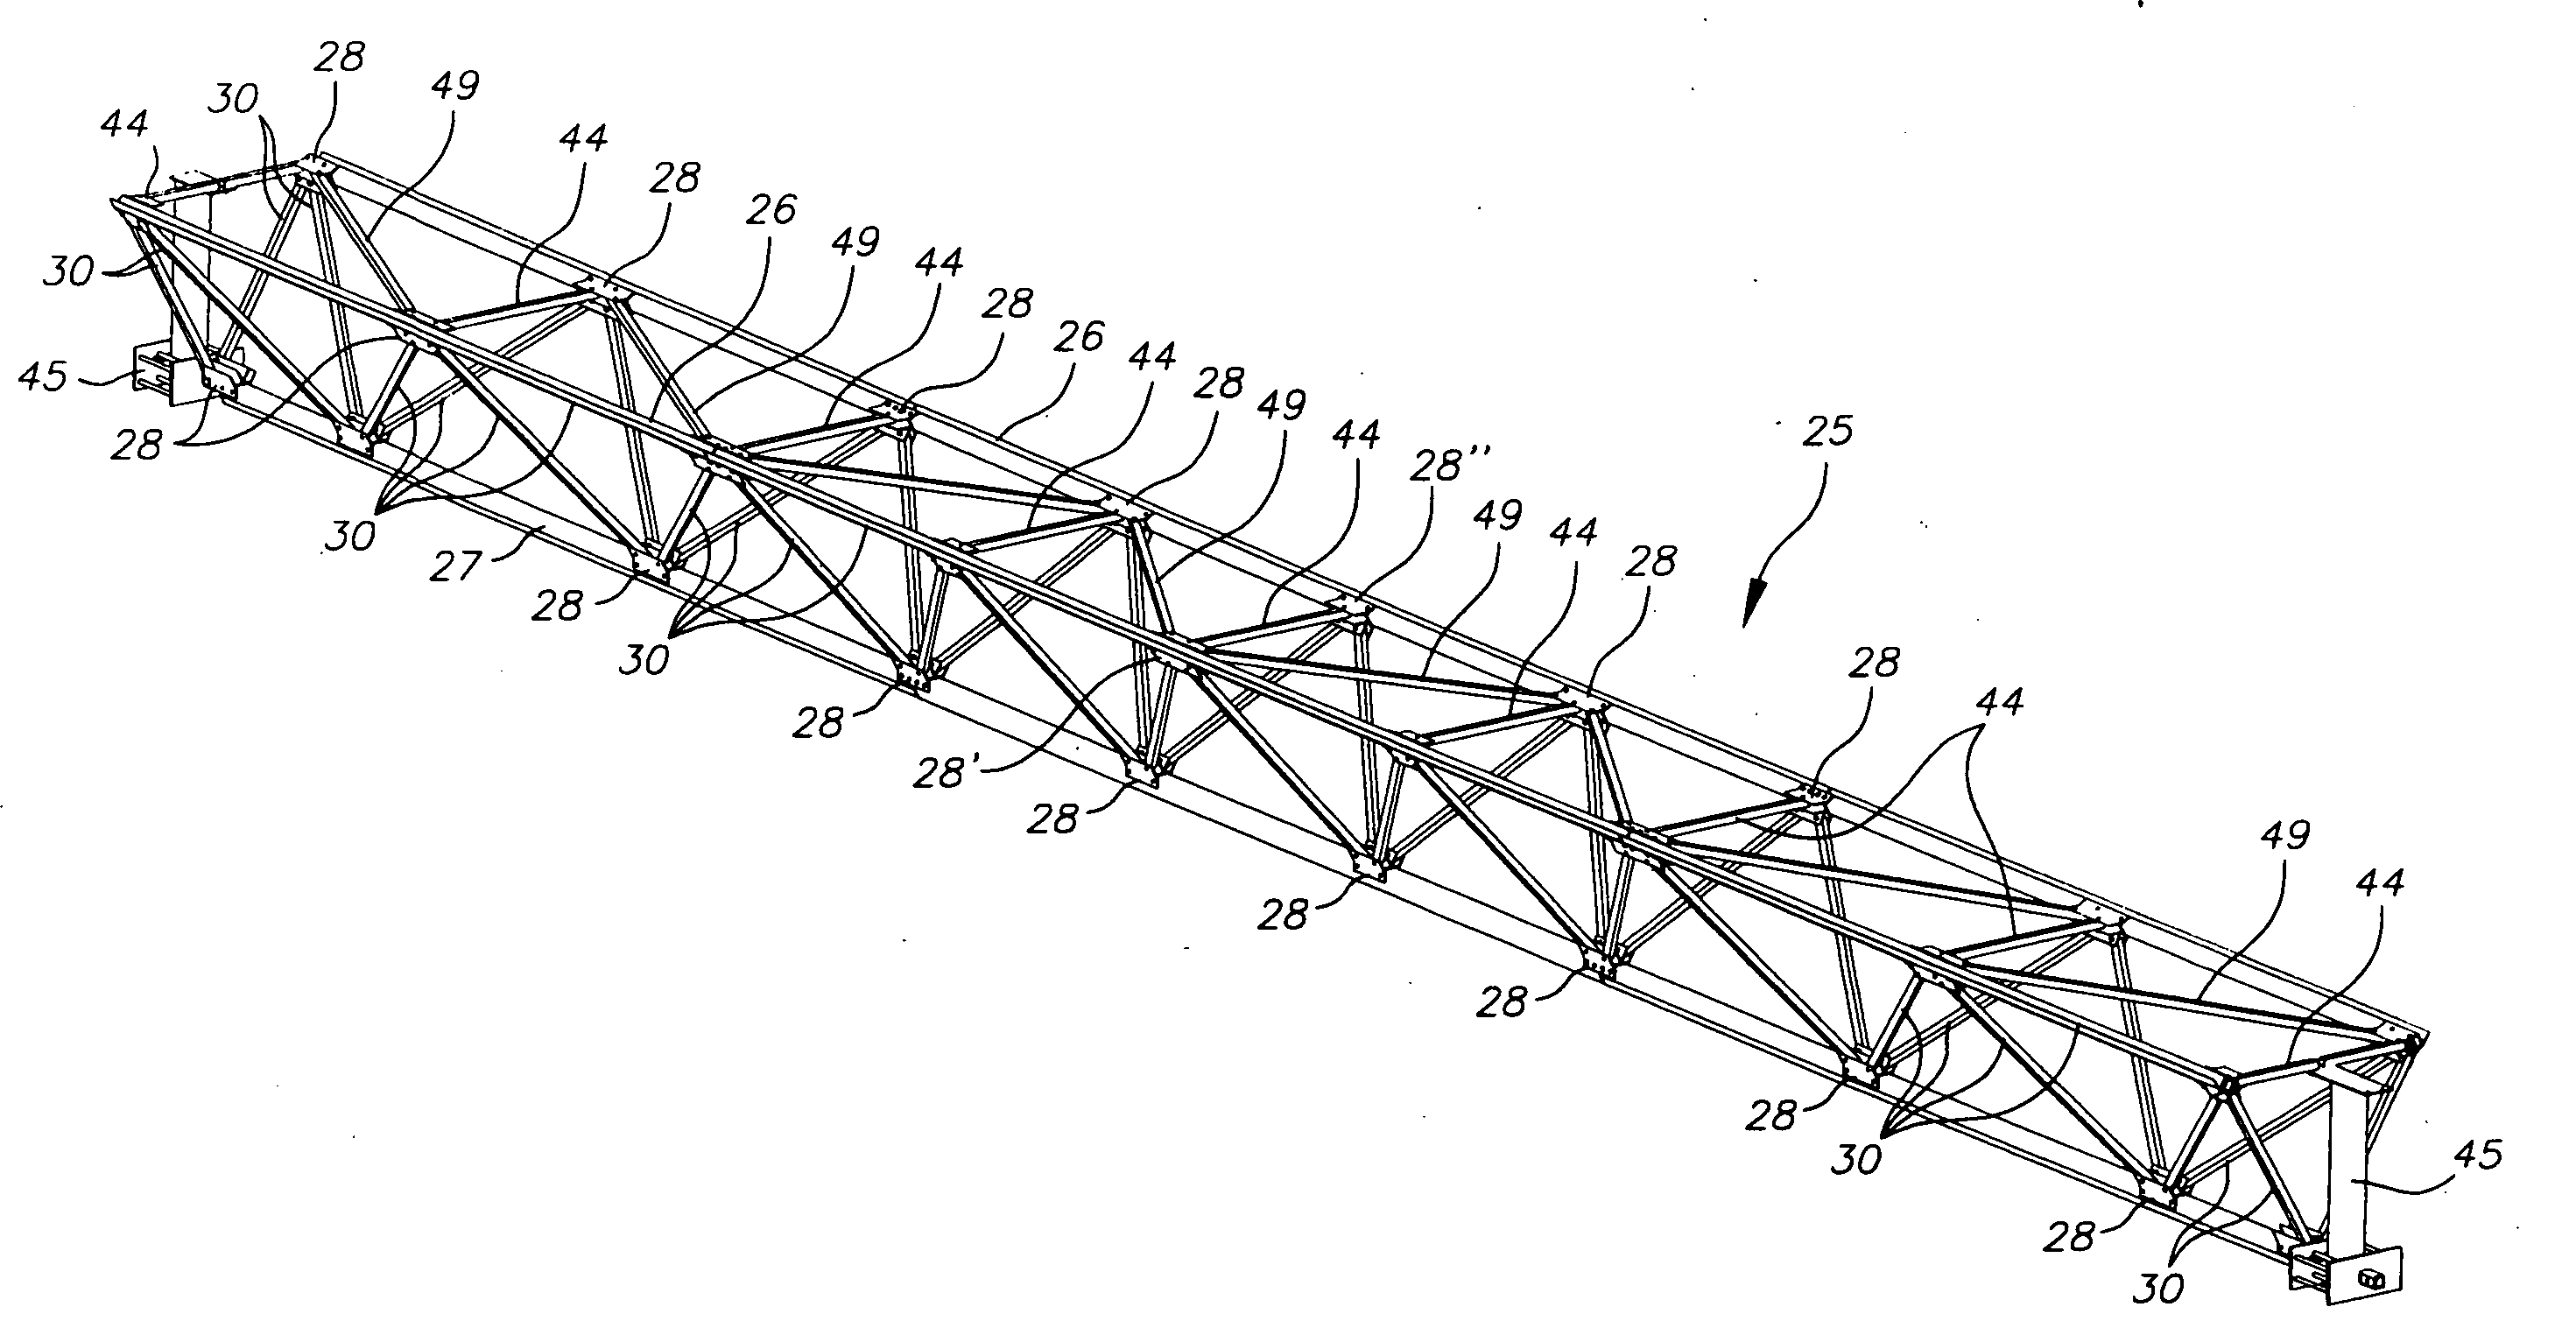 Tubular structural member with non-uniform wall thickness